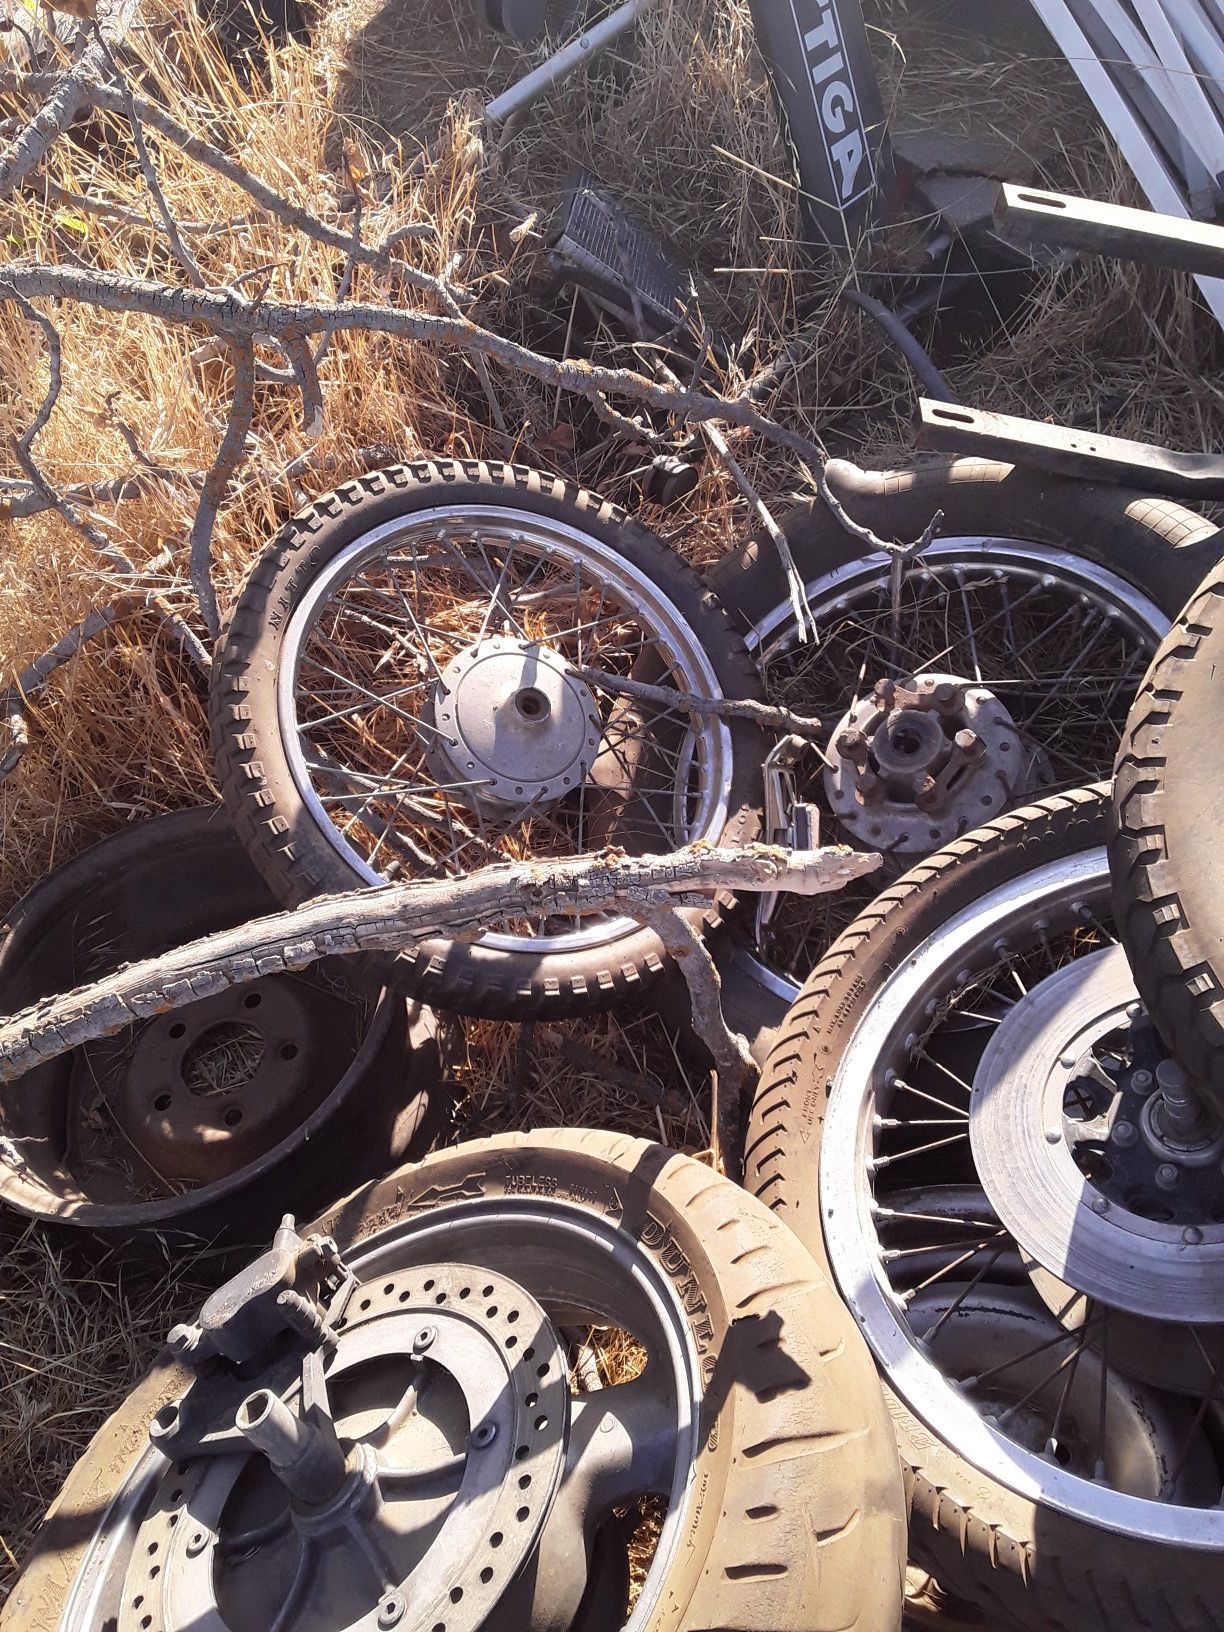 Motorcycle wheels and other parts